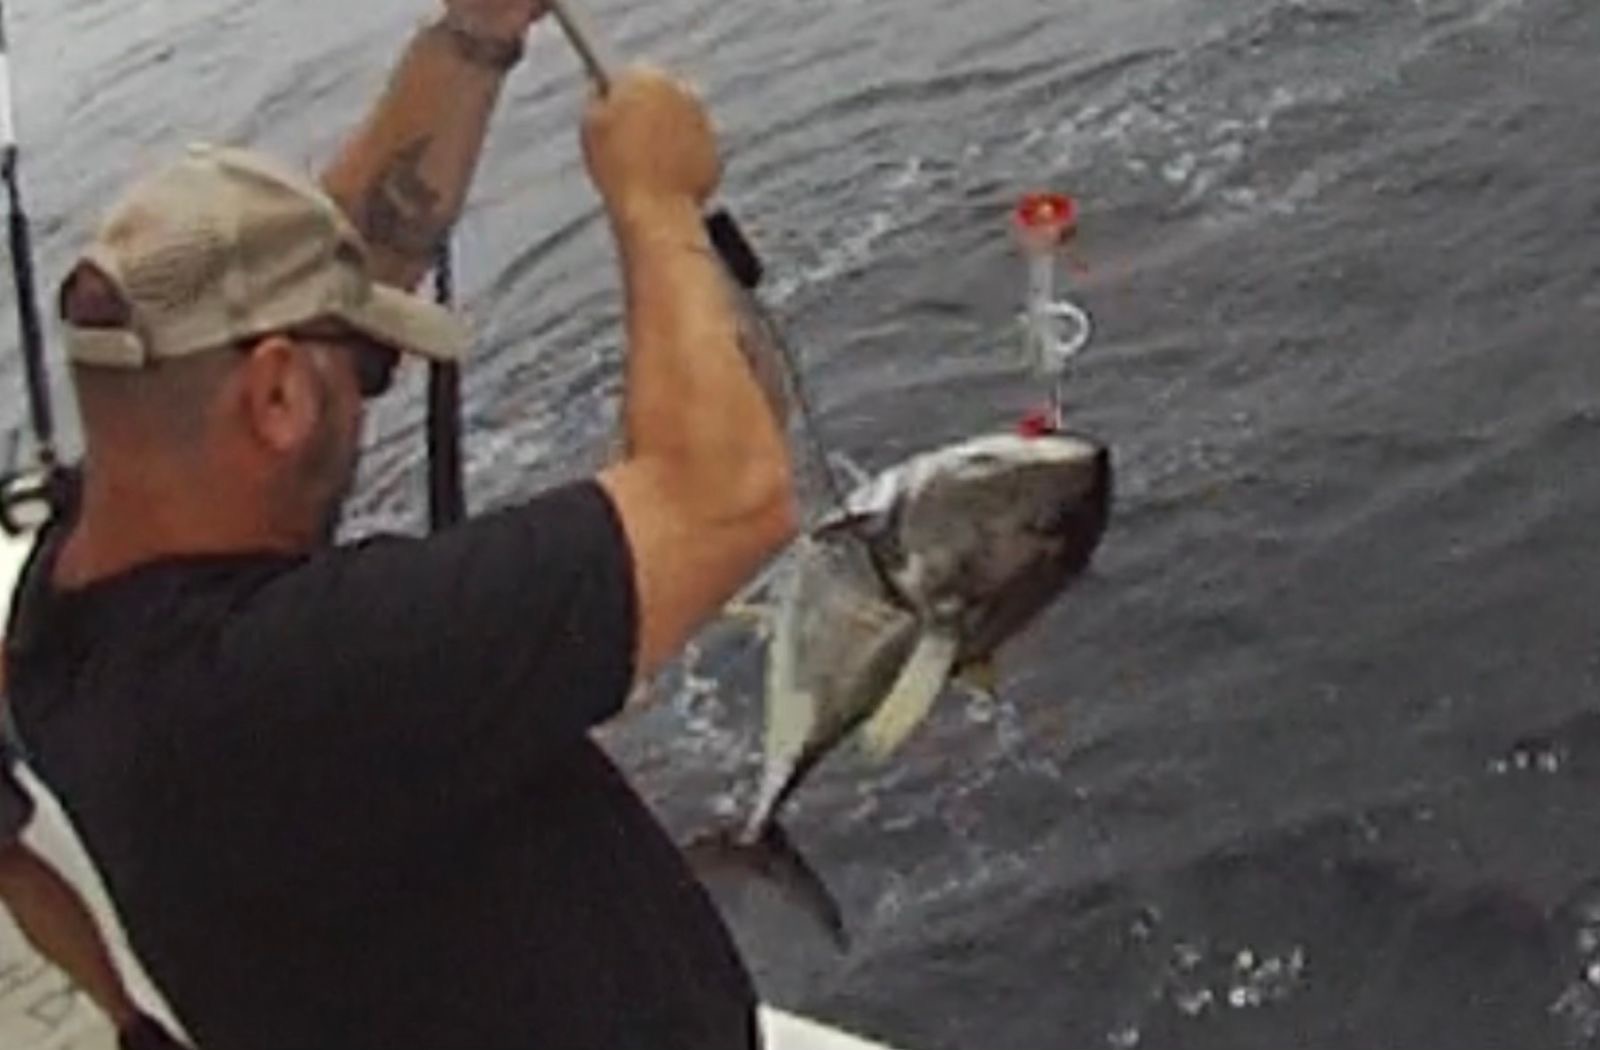 Yellowfin Tuna caught on Topwater Popper being gaffed into boat